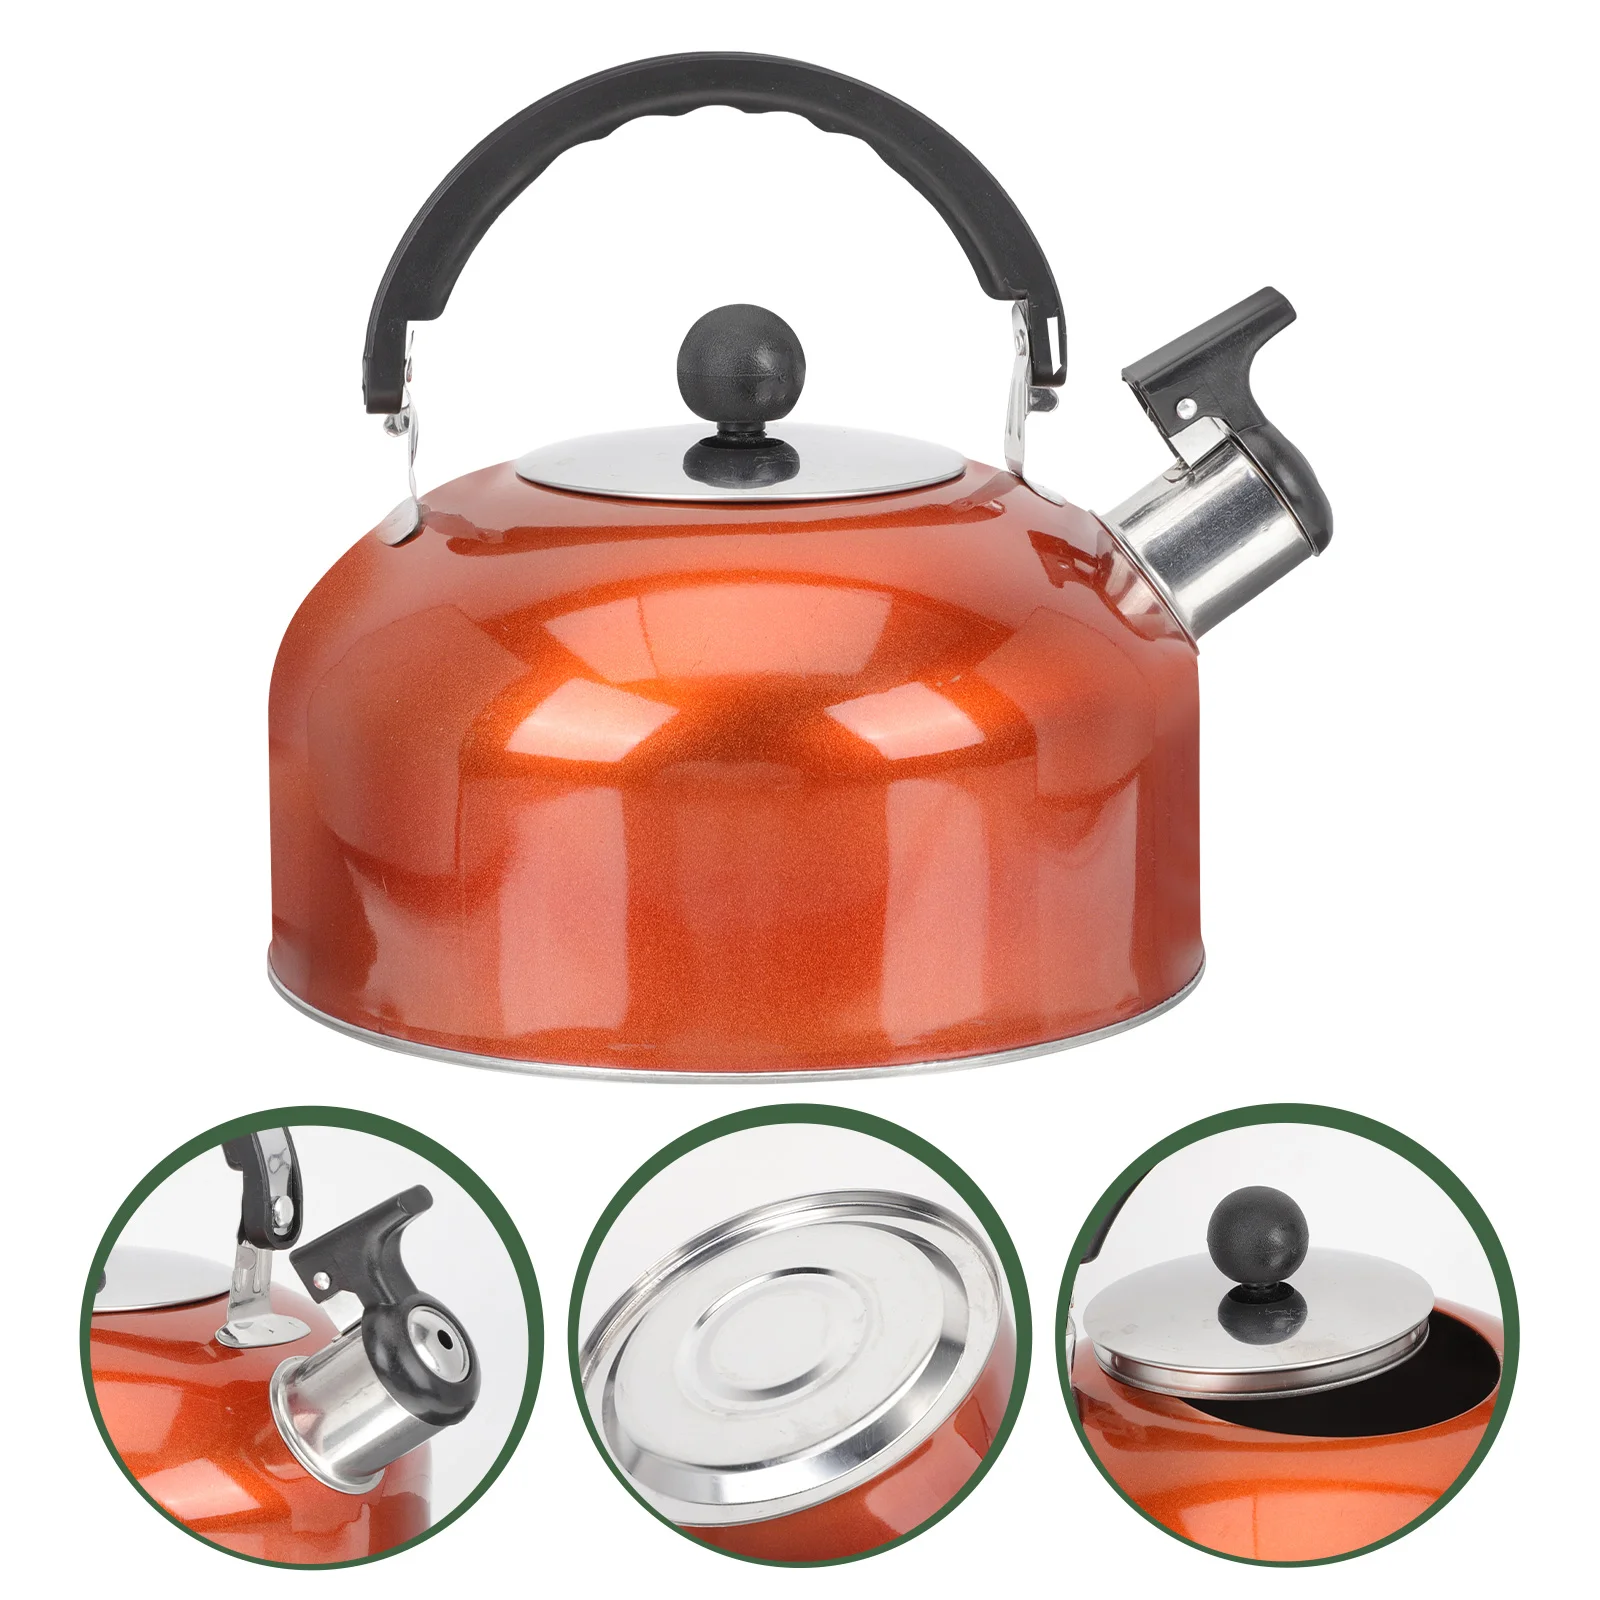 

Kettle Whistling Tea Water Stovetop Teapot Stove Stainless Steel Pot Boiling Teakettle Coffee Gas Whistle Kettles Heating Pots